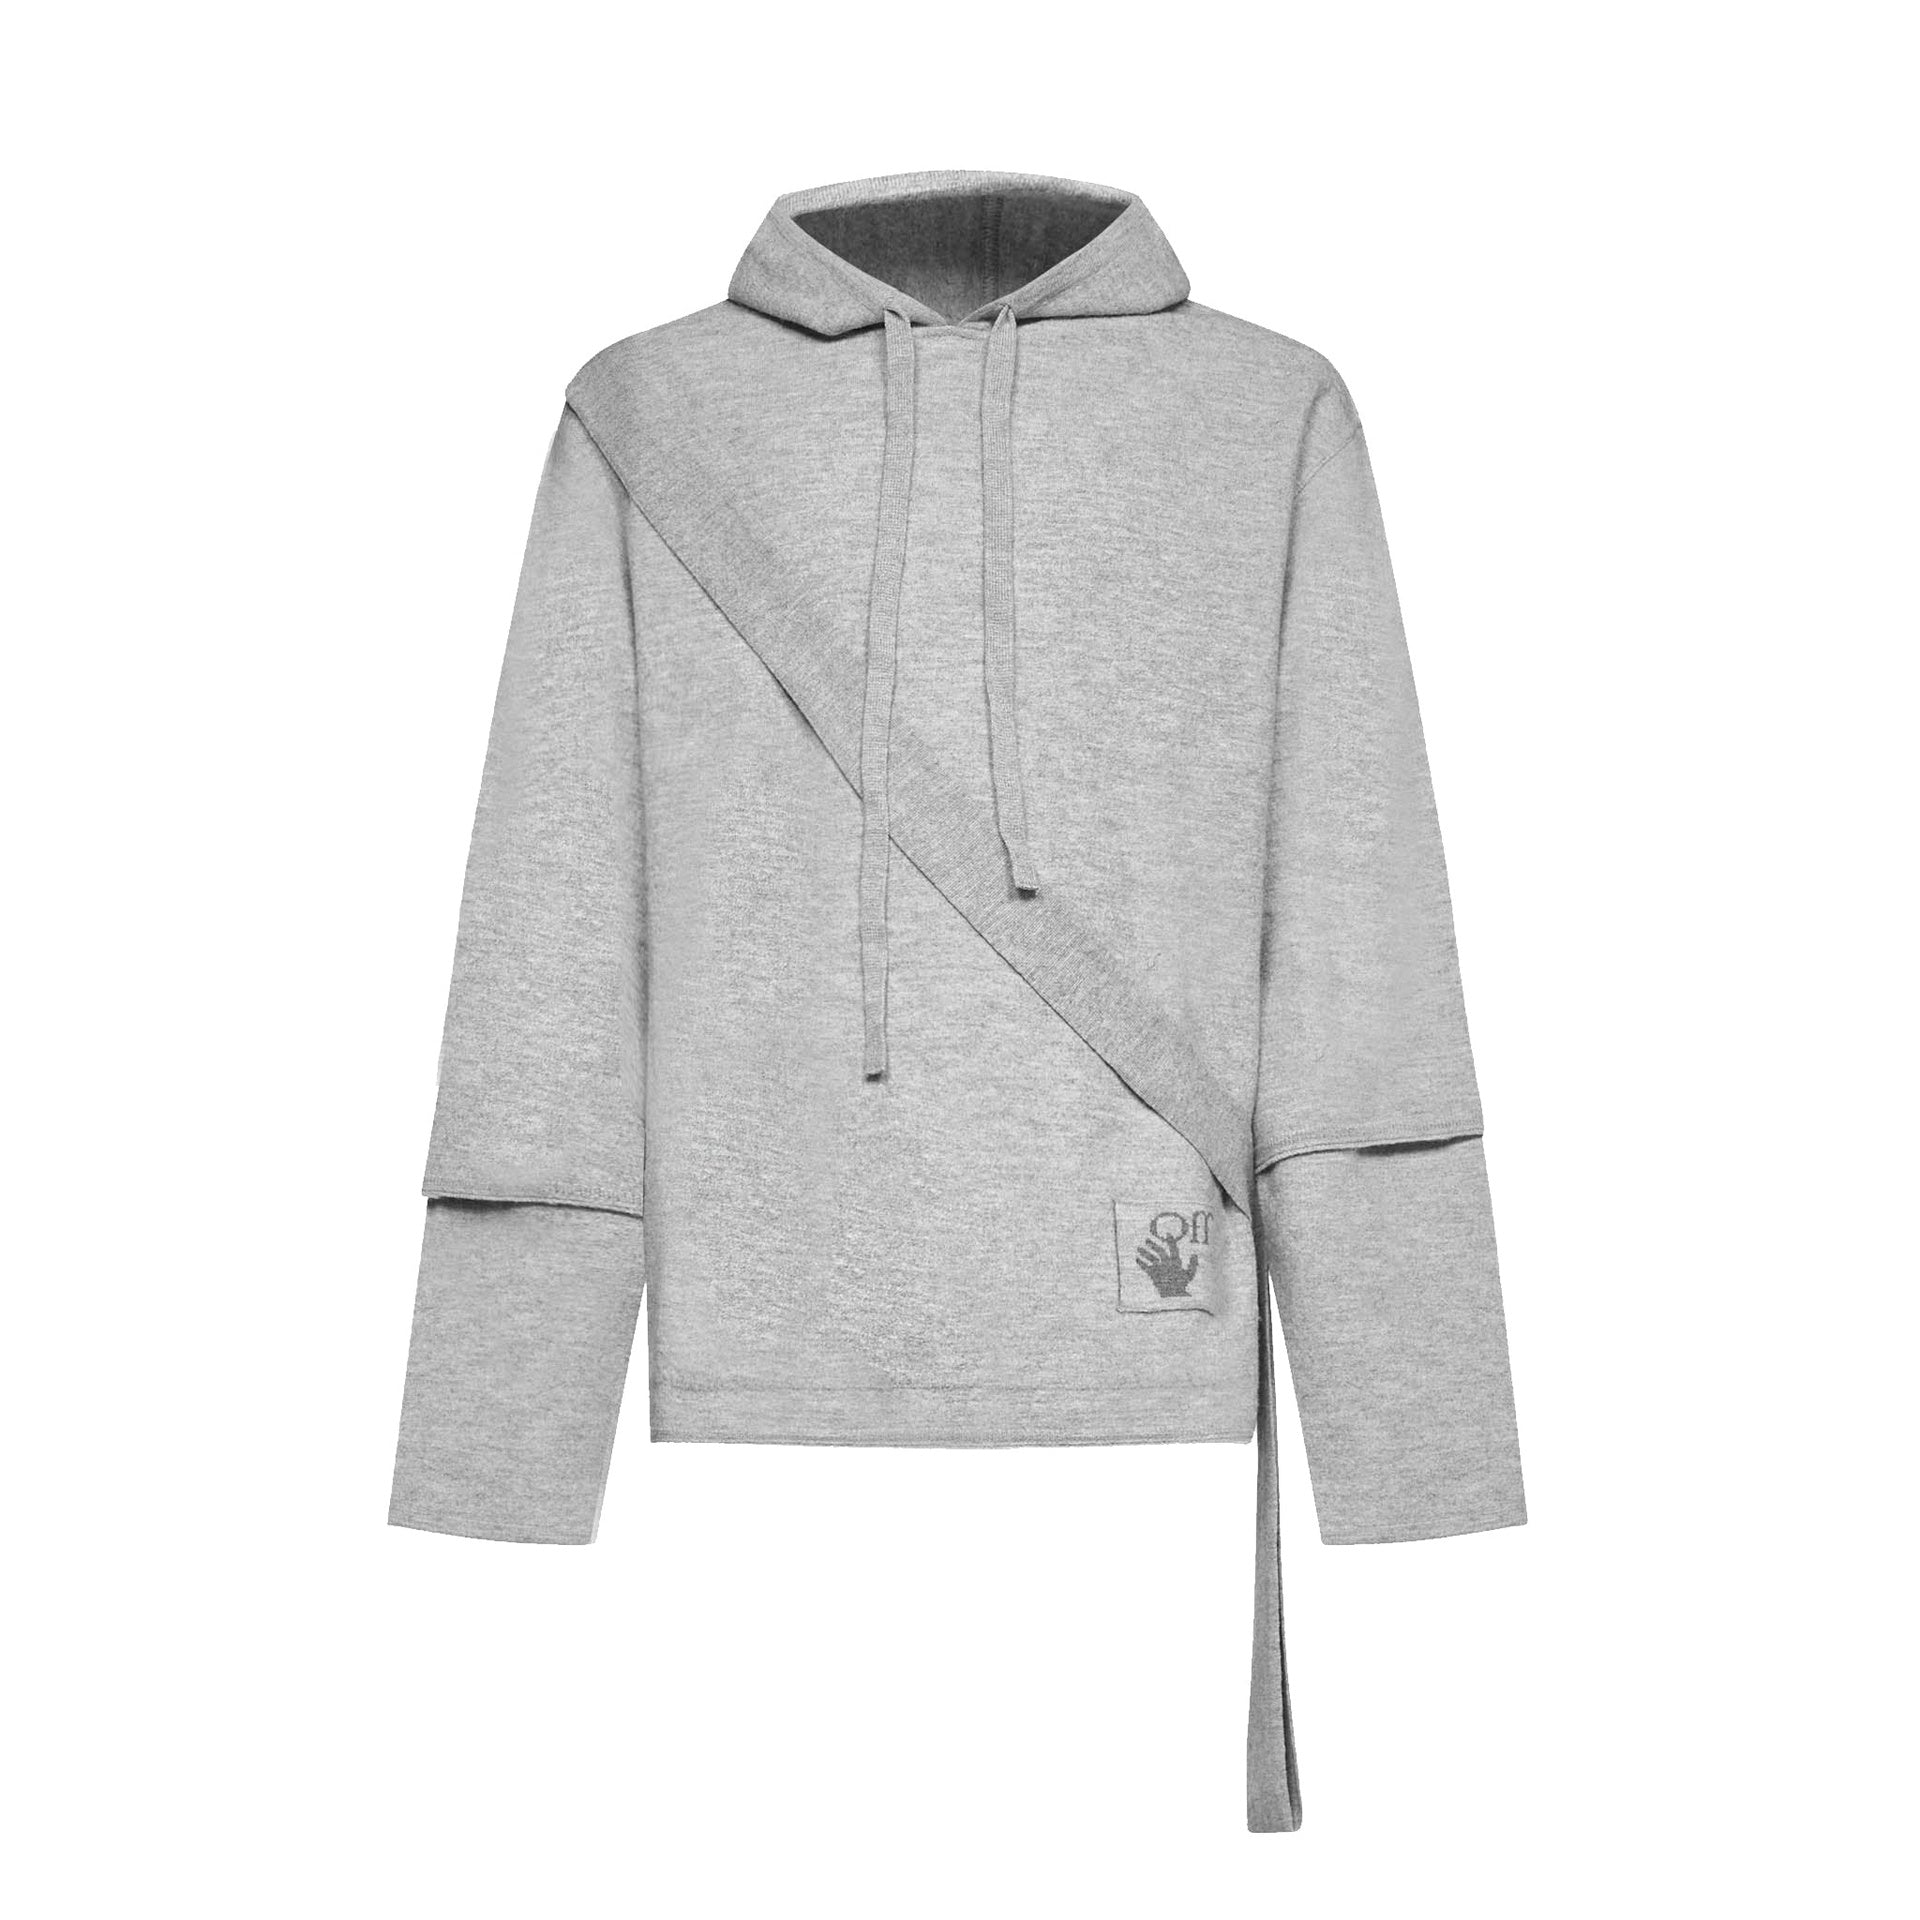 OFF-WHITE-OUTLET-SALE-Off-White-Wool-Sweatshirt-Strick-GREY-M-ARCHIVE-COLLECTION.jpg